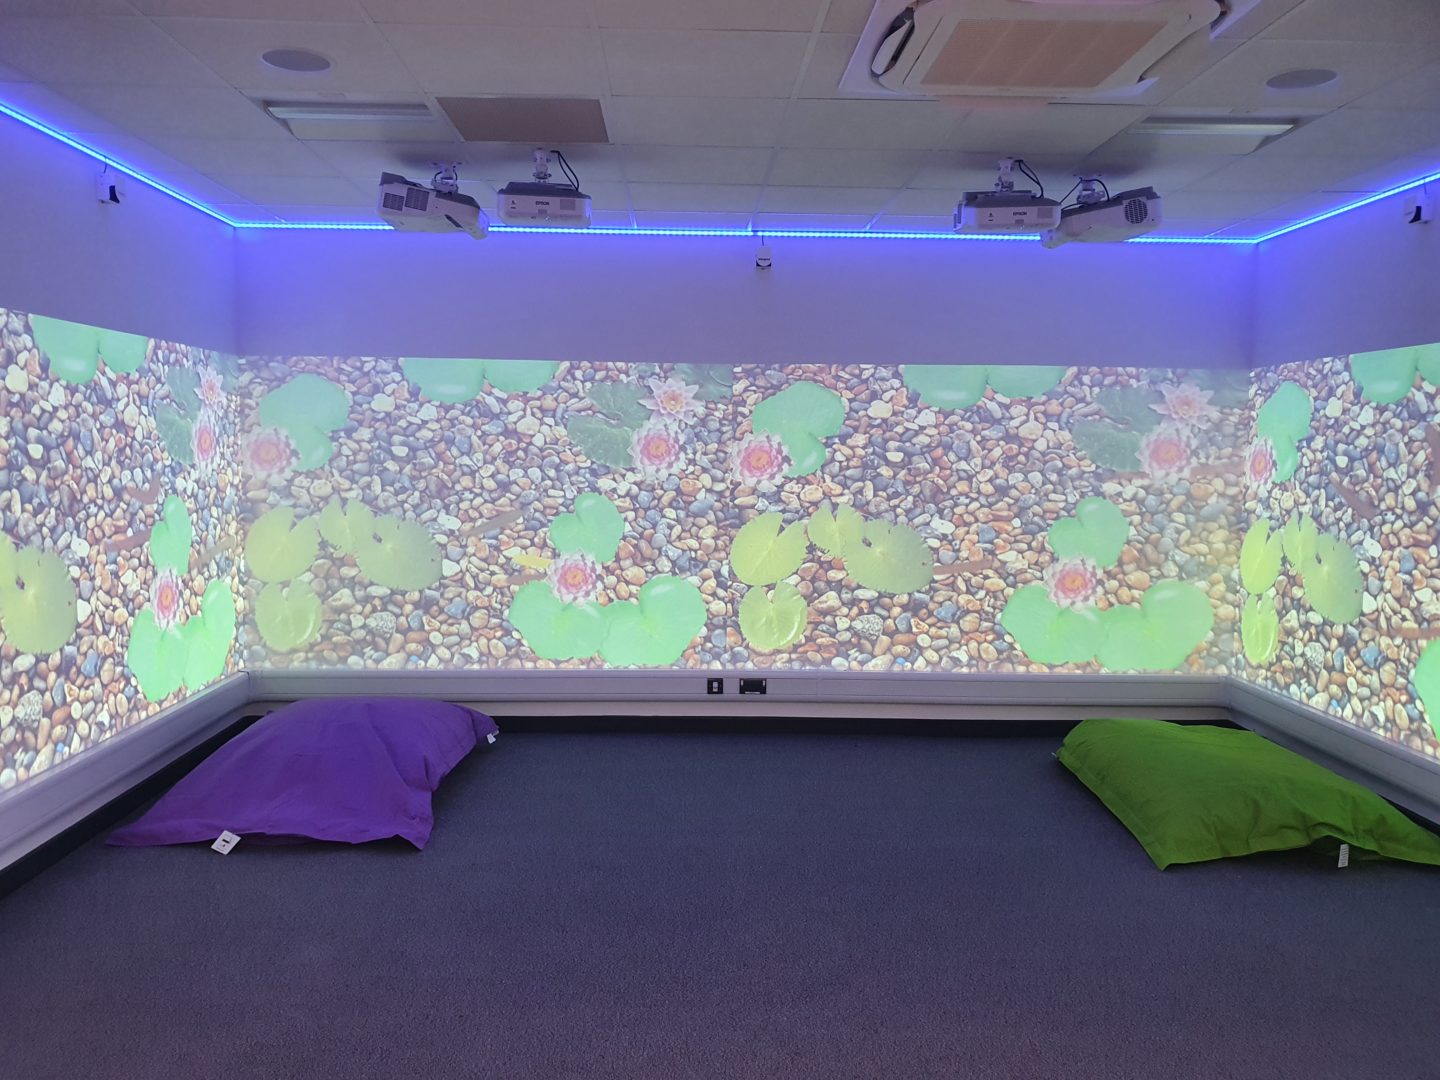 fully interactive immersive room including 4 interactive walls, and a range of DMX sensory stimulation hardware